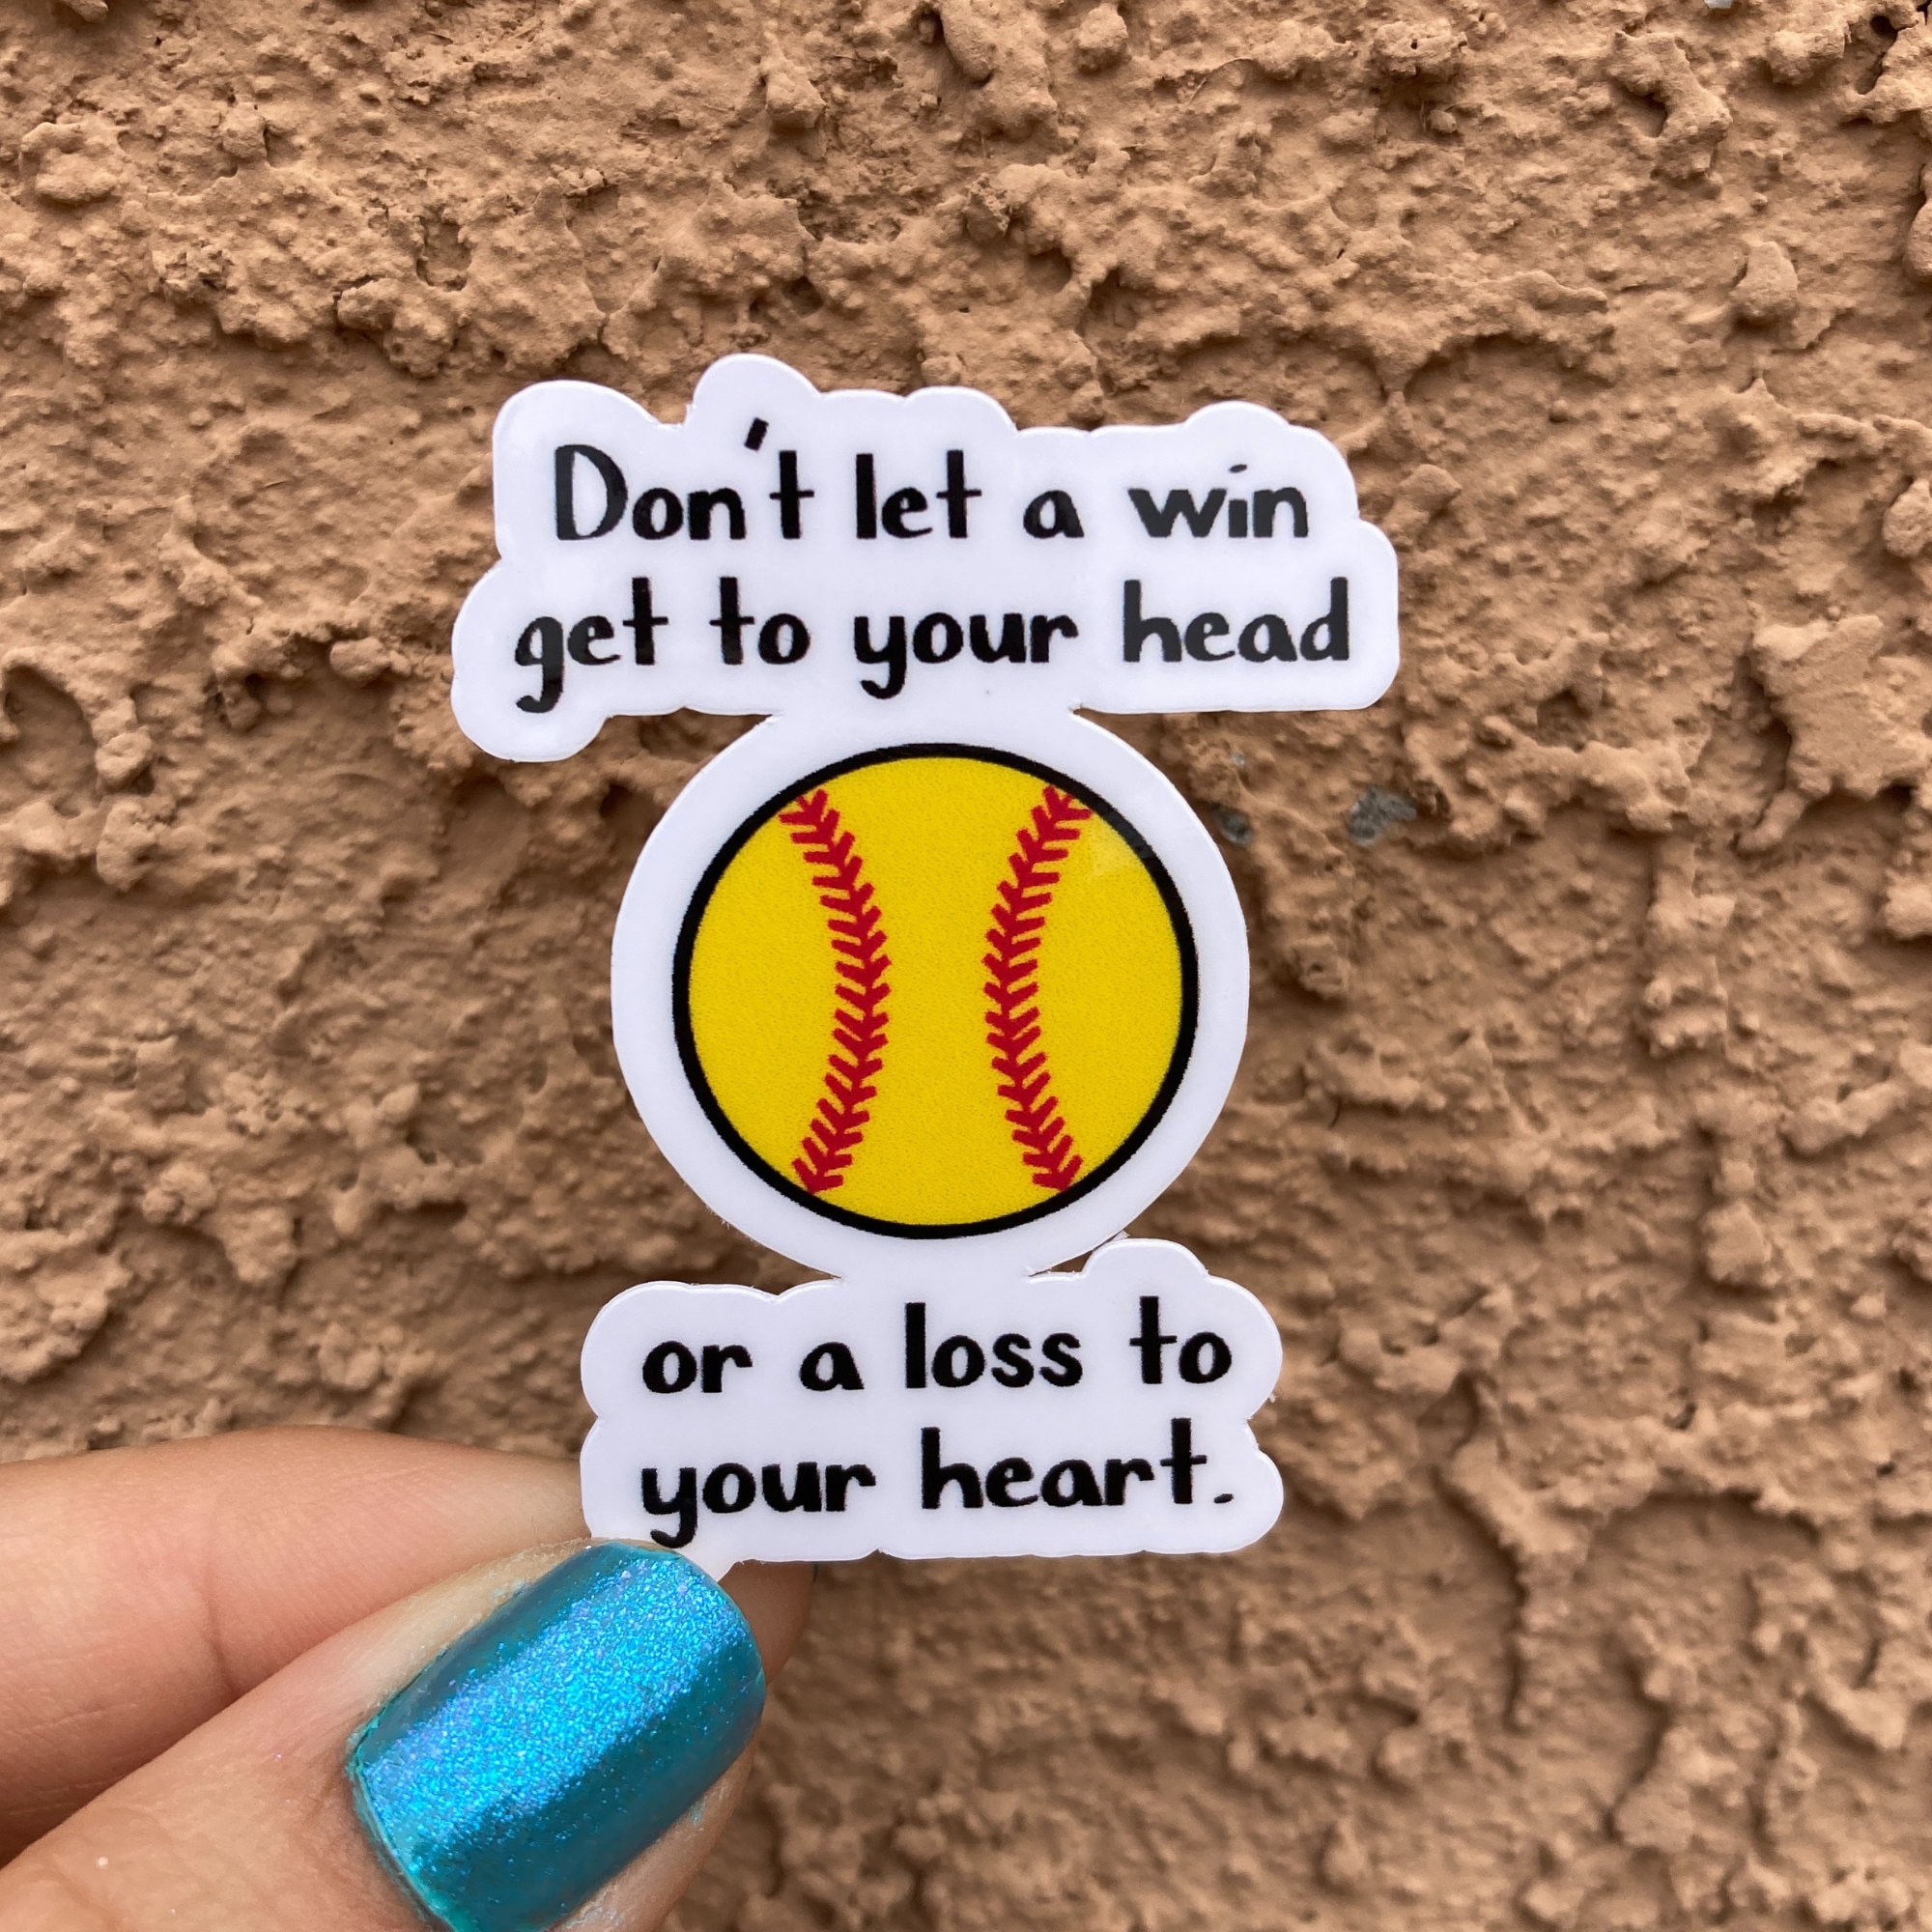 Hustle Quote Sticker - 3x2inch – Fearless Fastpitch